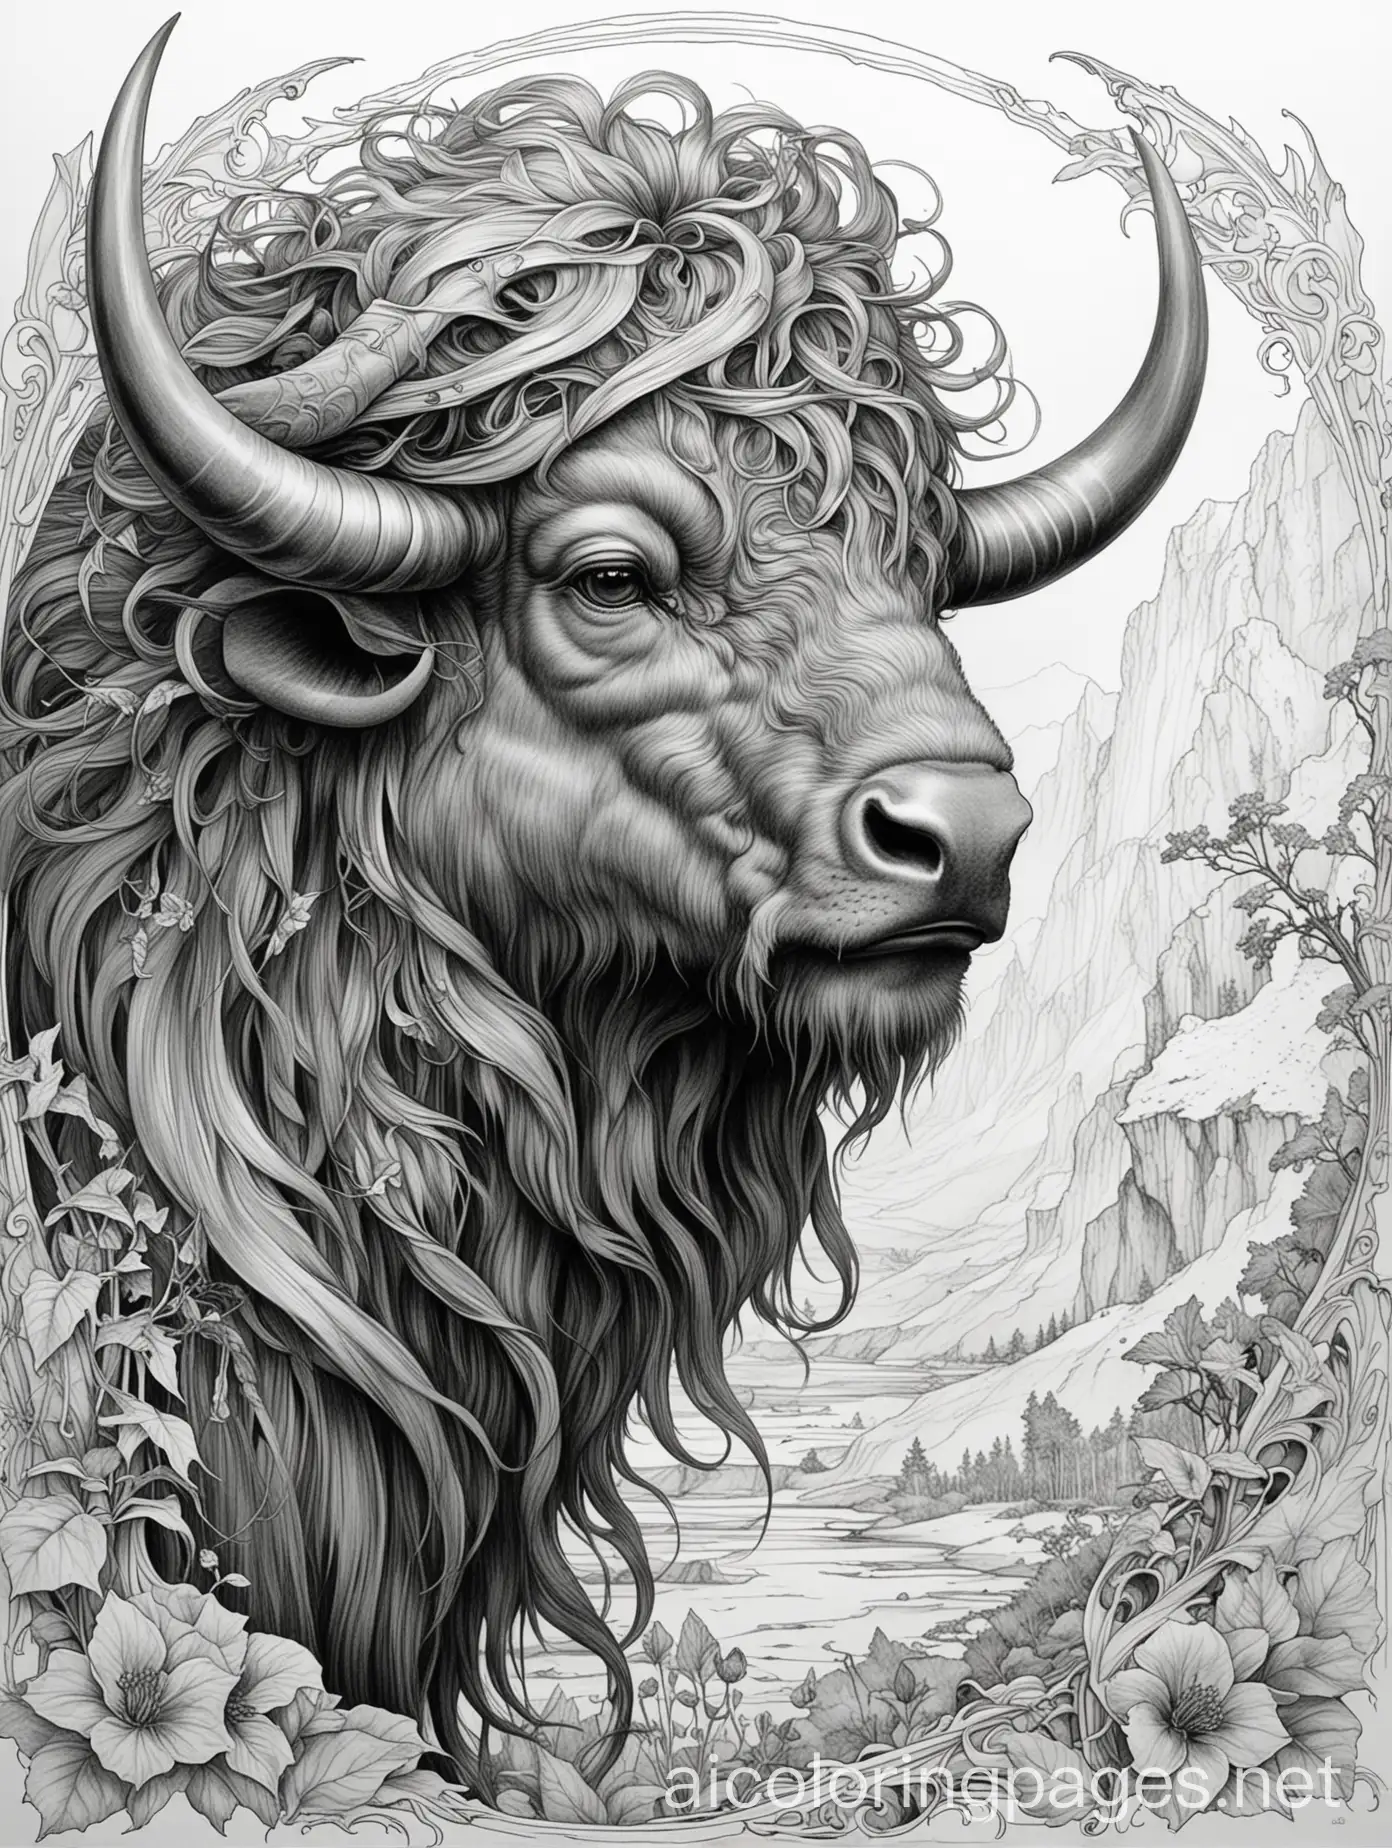 Buffalo,  fantasy, ethereal, beautiful, Art nouveau, in the style of Brian Froud, Coloring Page, black and white, line art, white background, Simplicity, Ample White Space. The background of the coloring page is plain white to make it easy for young children to color within the lines. The outlines of all the subjects are easy to distinguish, making it simple for kids to color without too much difficulty